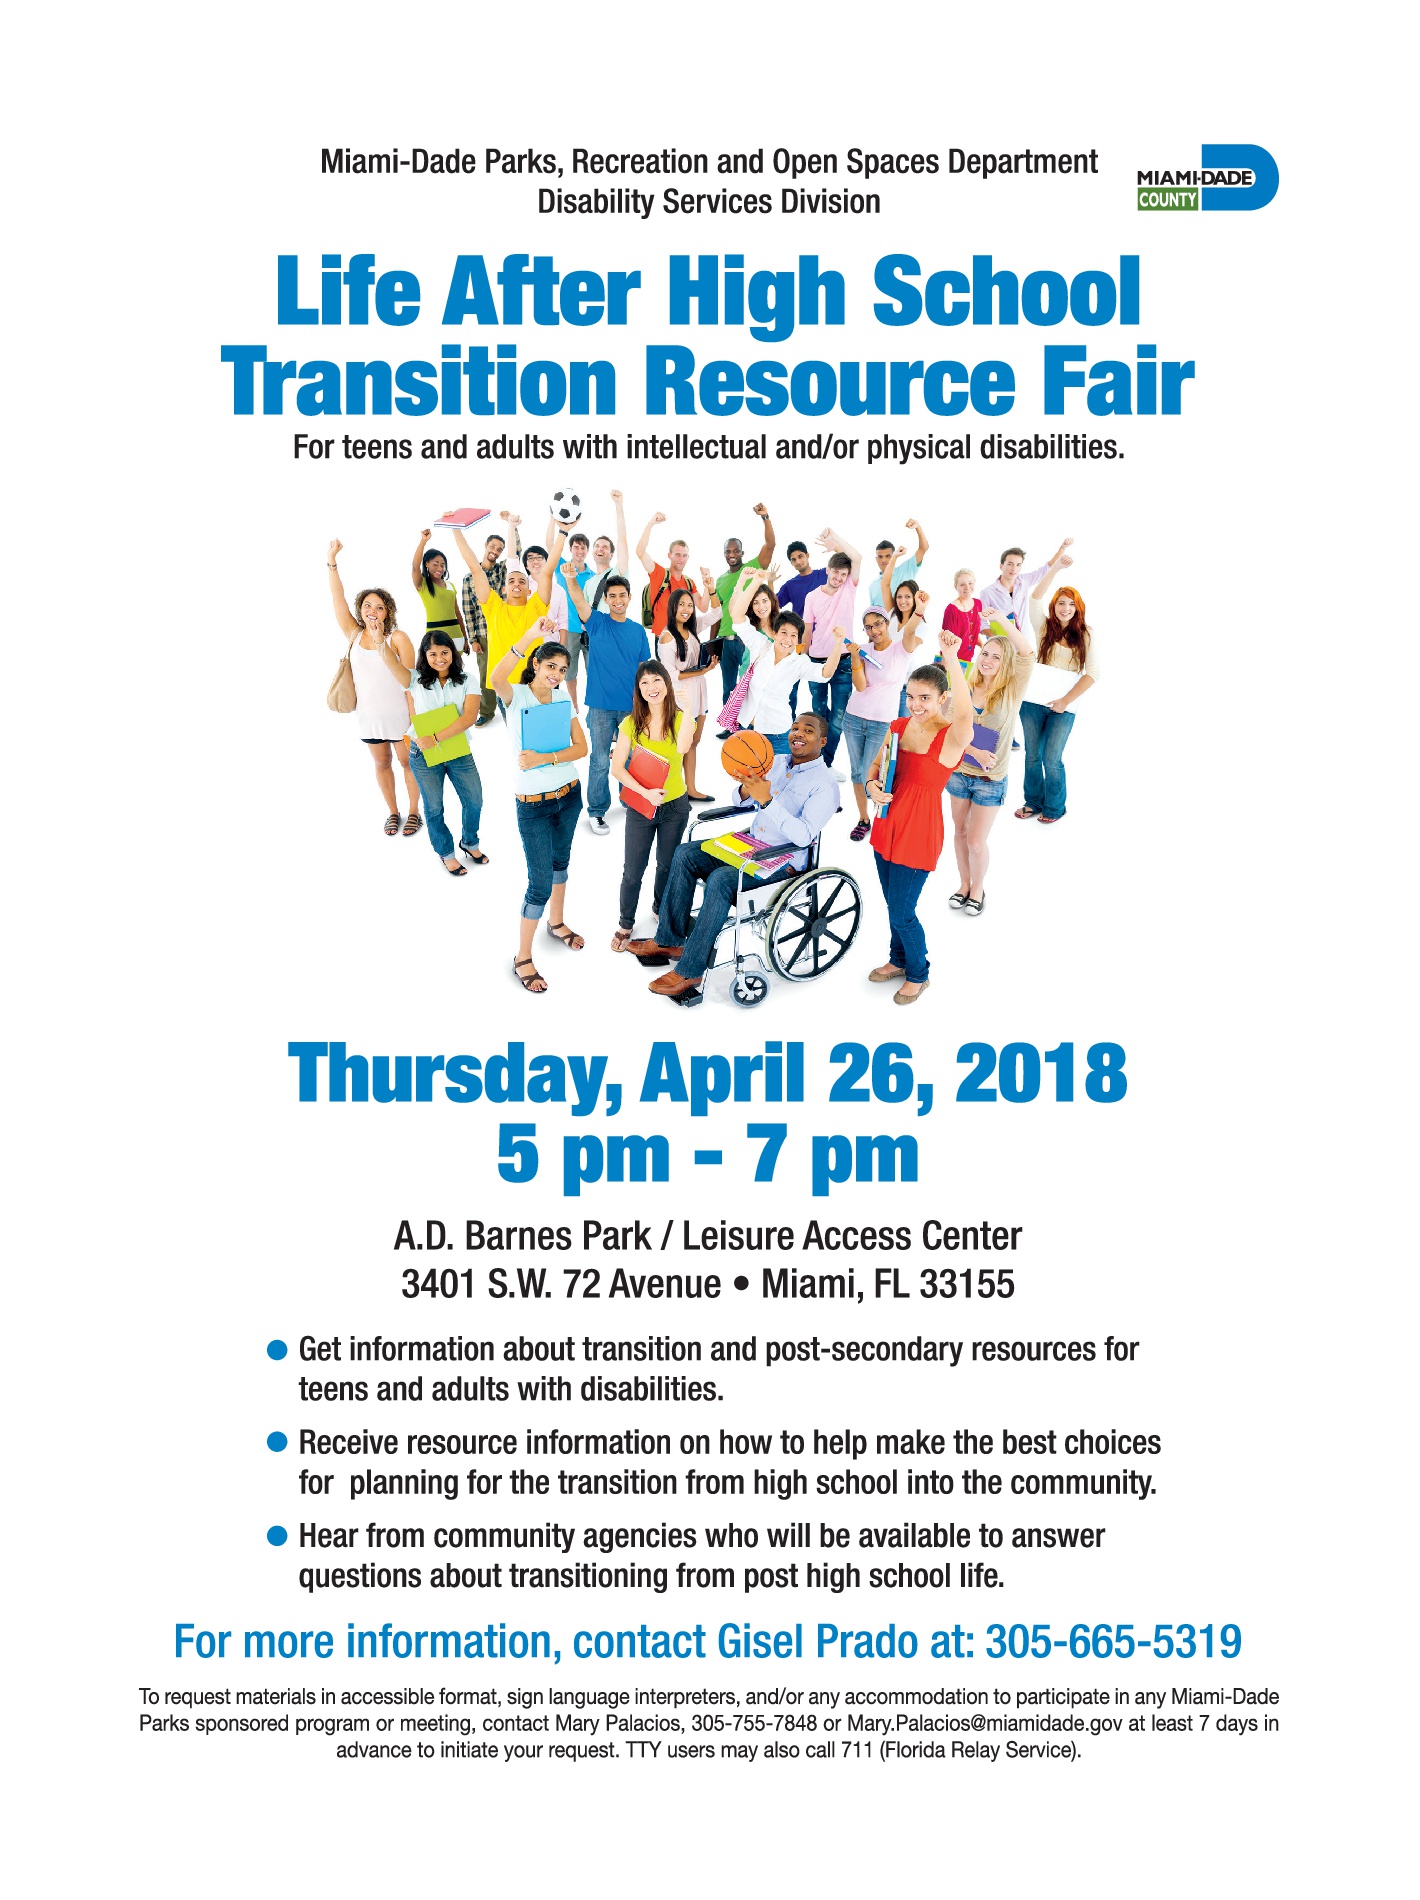 Life After High School Transition Resource Fair